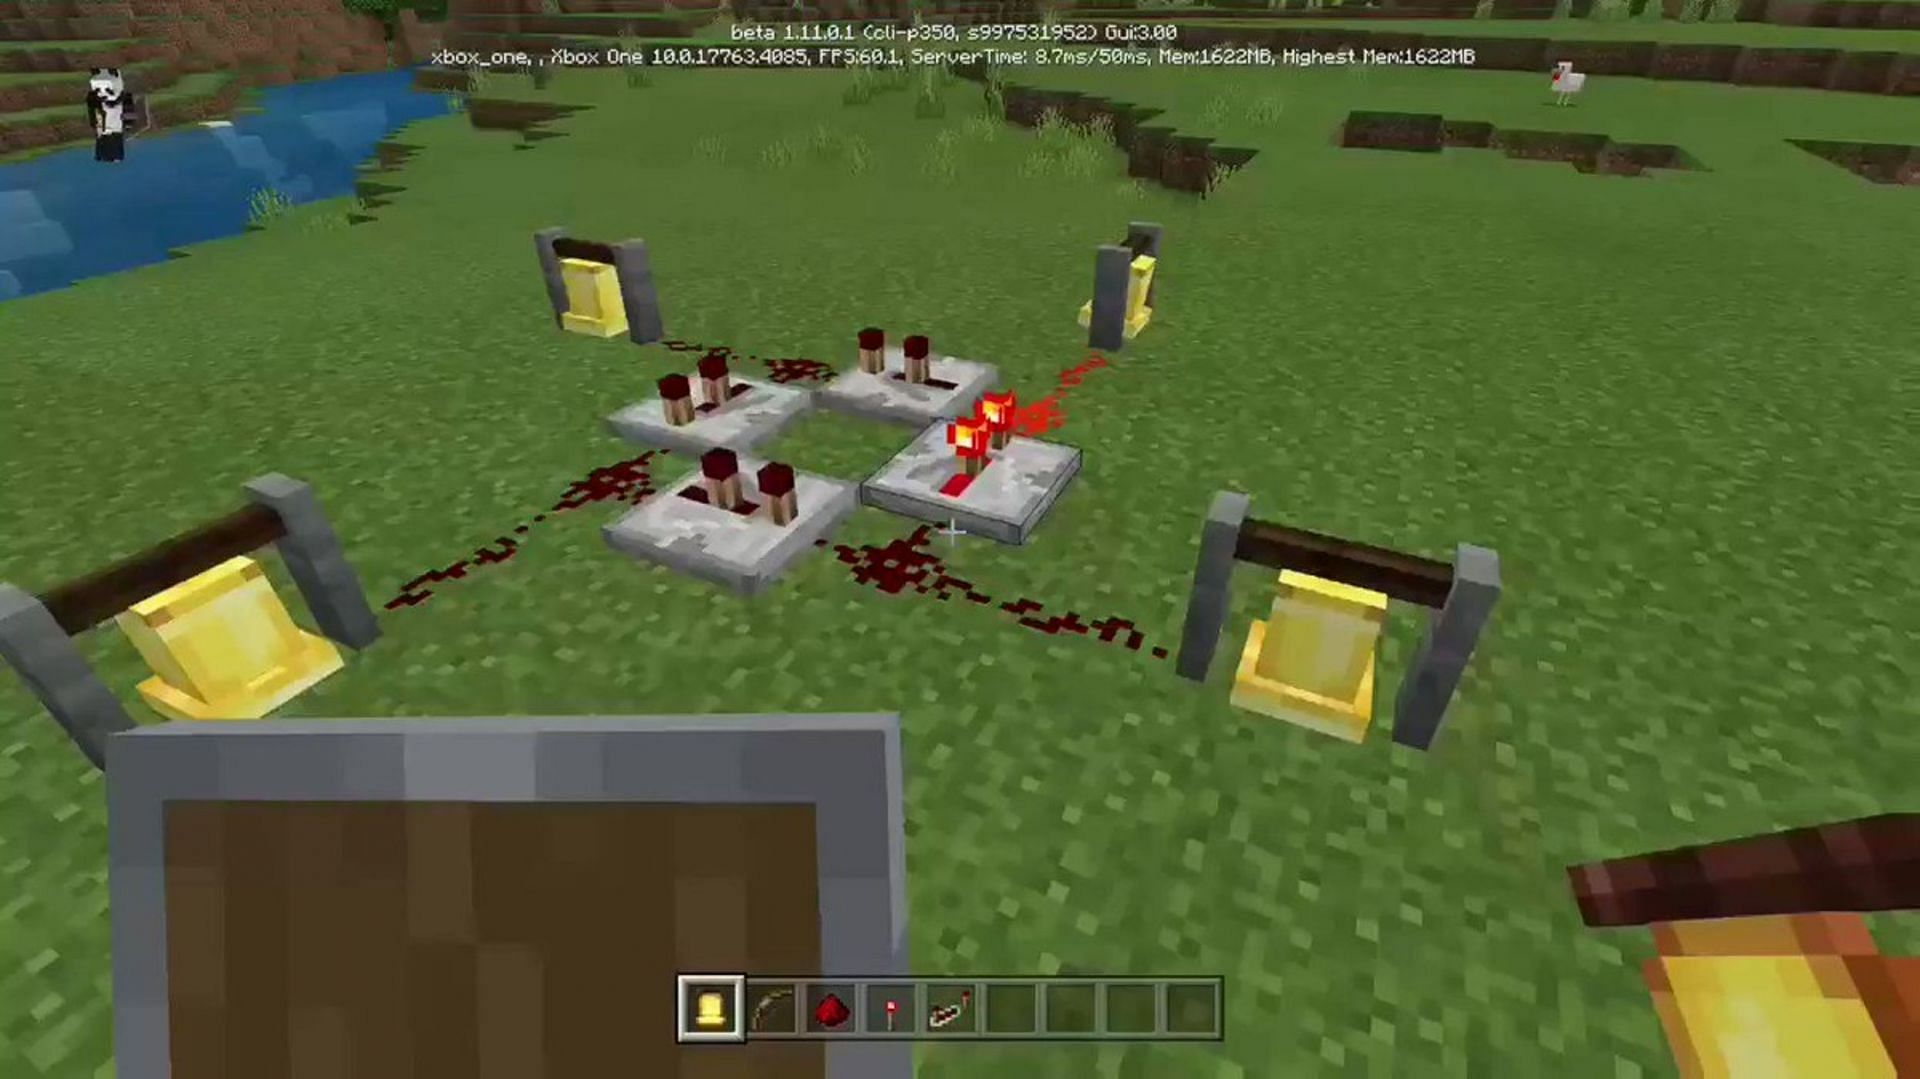 A bell-ringing apparatus created by a player (Image via @beta_mcpe1/Twitter)